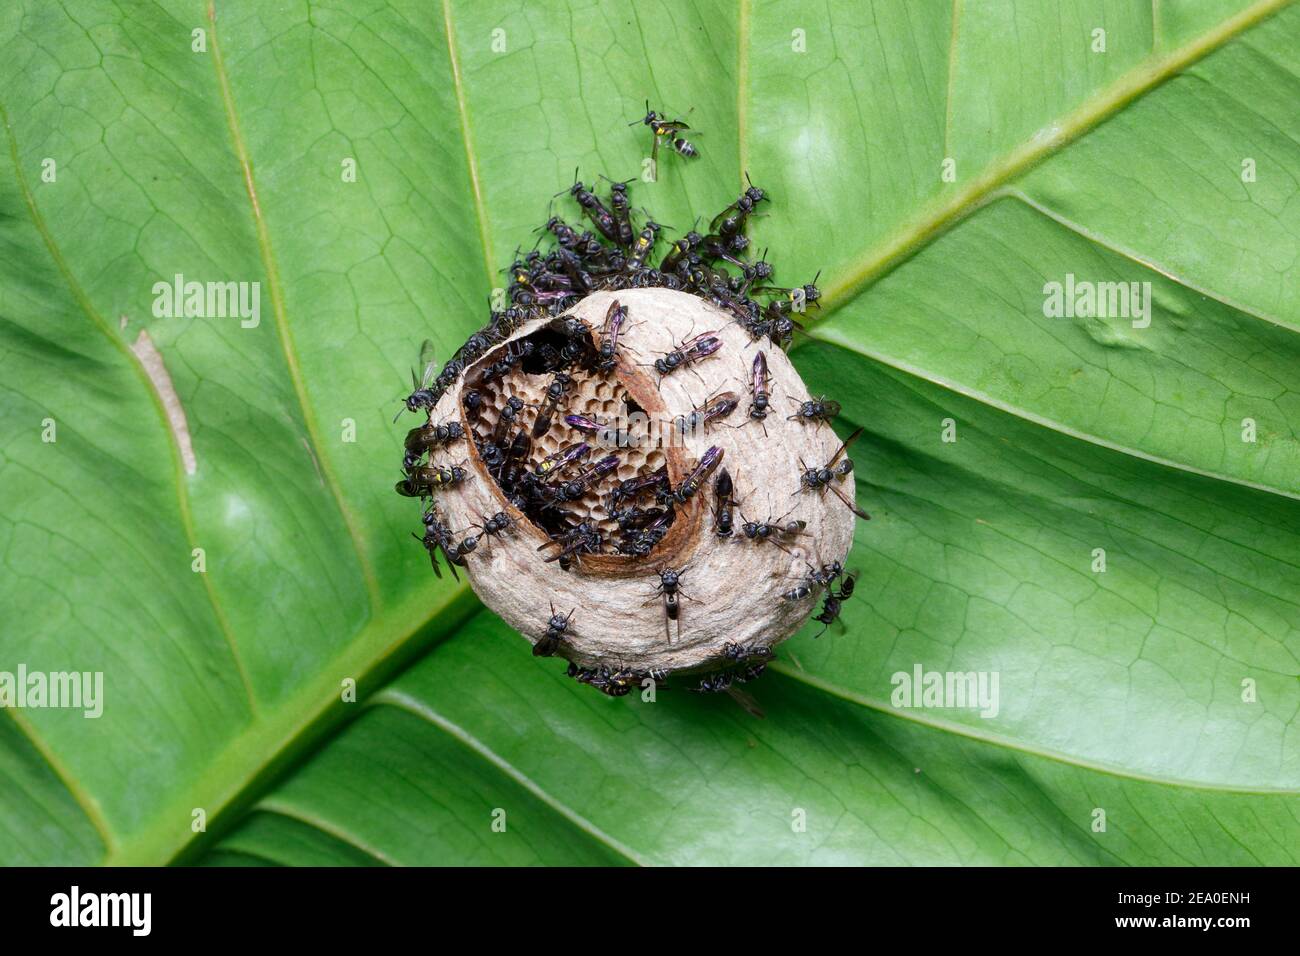 Black wasps, Polybia occidentalis, are building a nest. Stock Photo